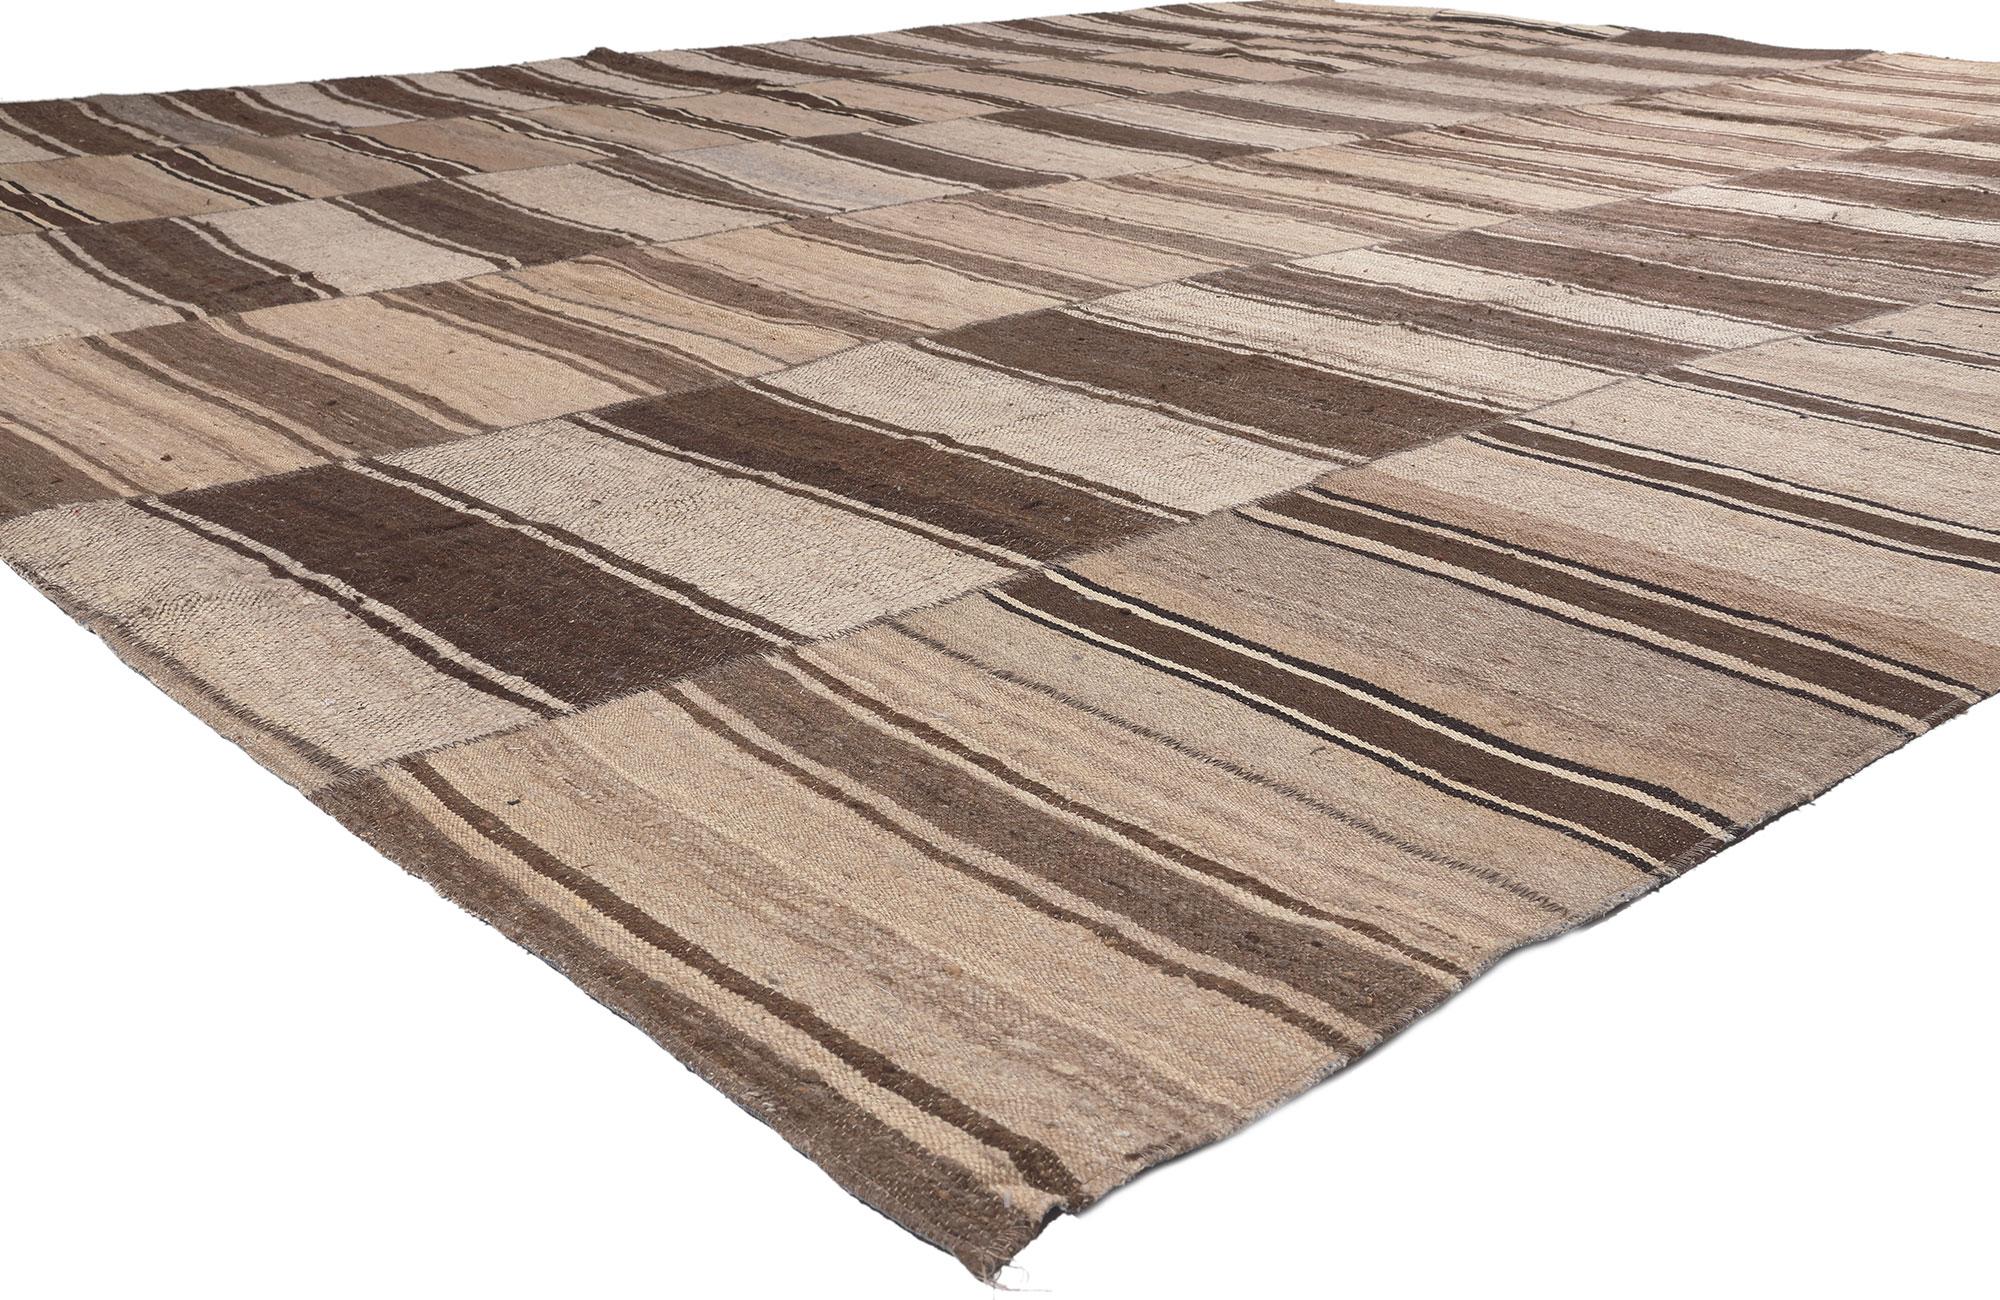 60635 Brown Vintage Striped Turkish Kilim Rug, 13'00 x 16'00. In the creation of this vintage Turkish kilim rug, the essence of Wabi-Sabi gracefully intertwines with a commitment to sustainable design, giving rise to a masterpiece that effortlessly